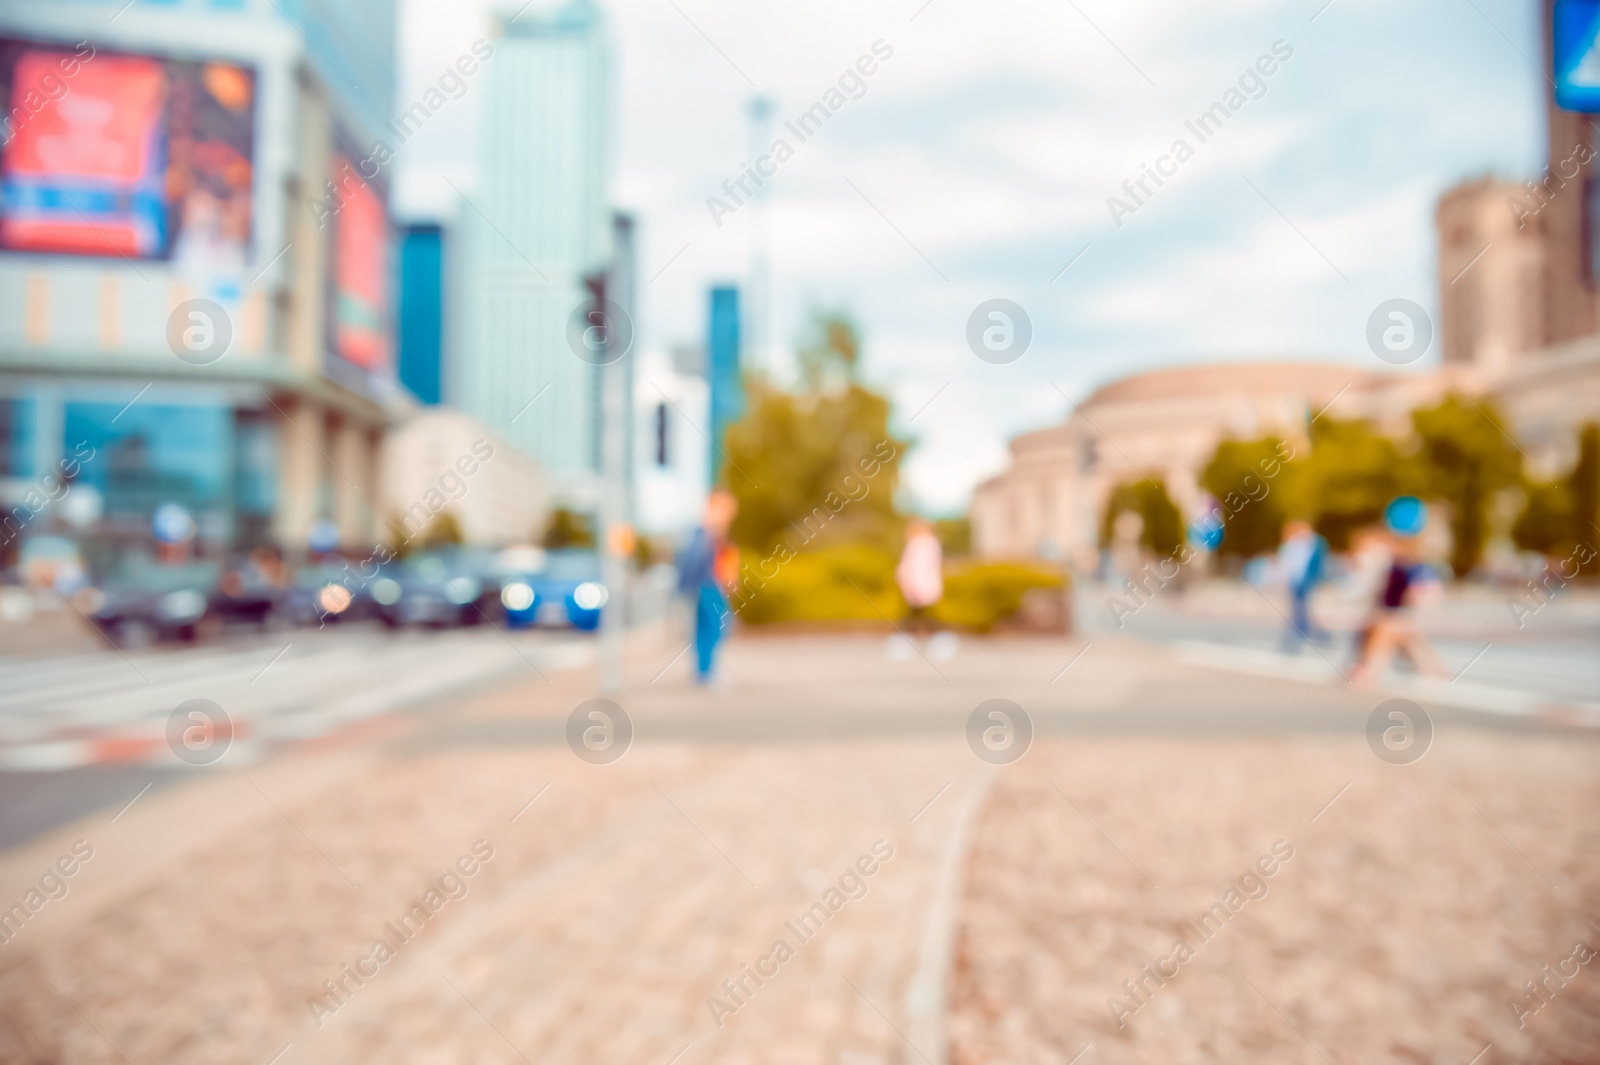 Photo of People walking on city street, blurred view